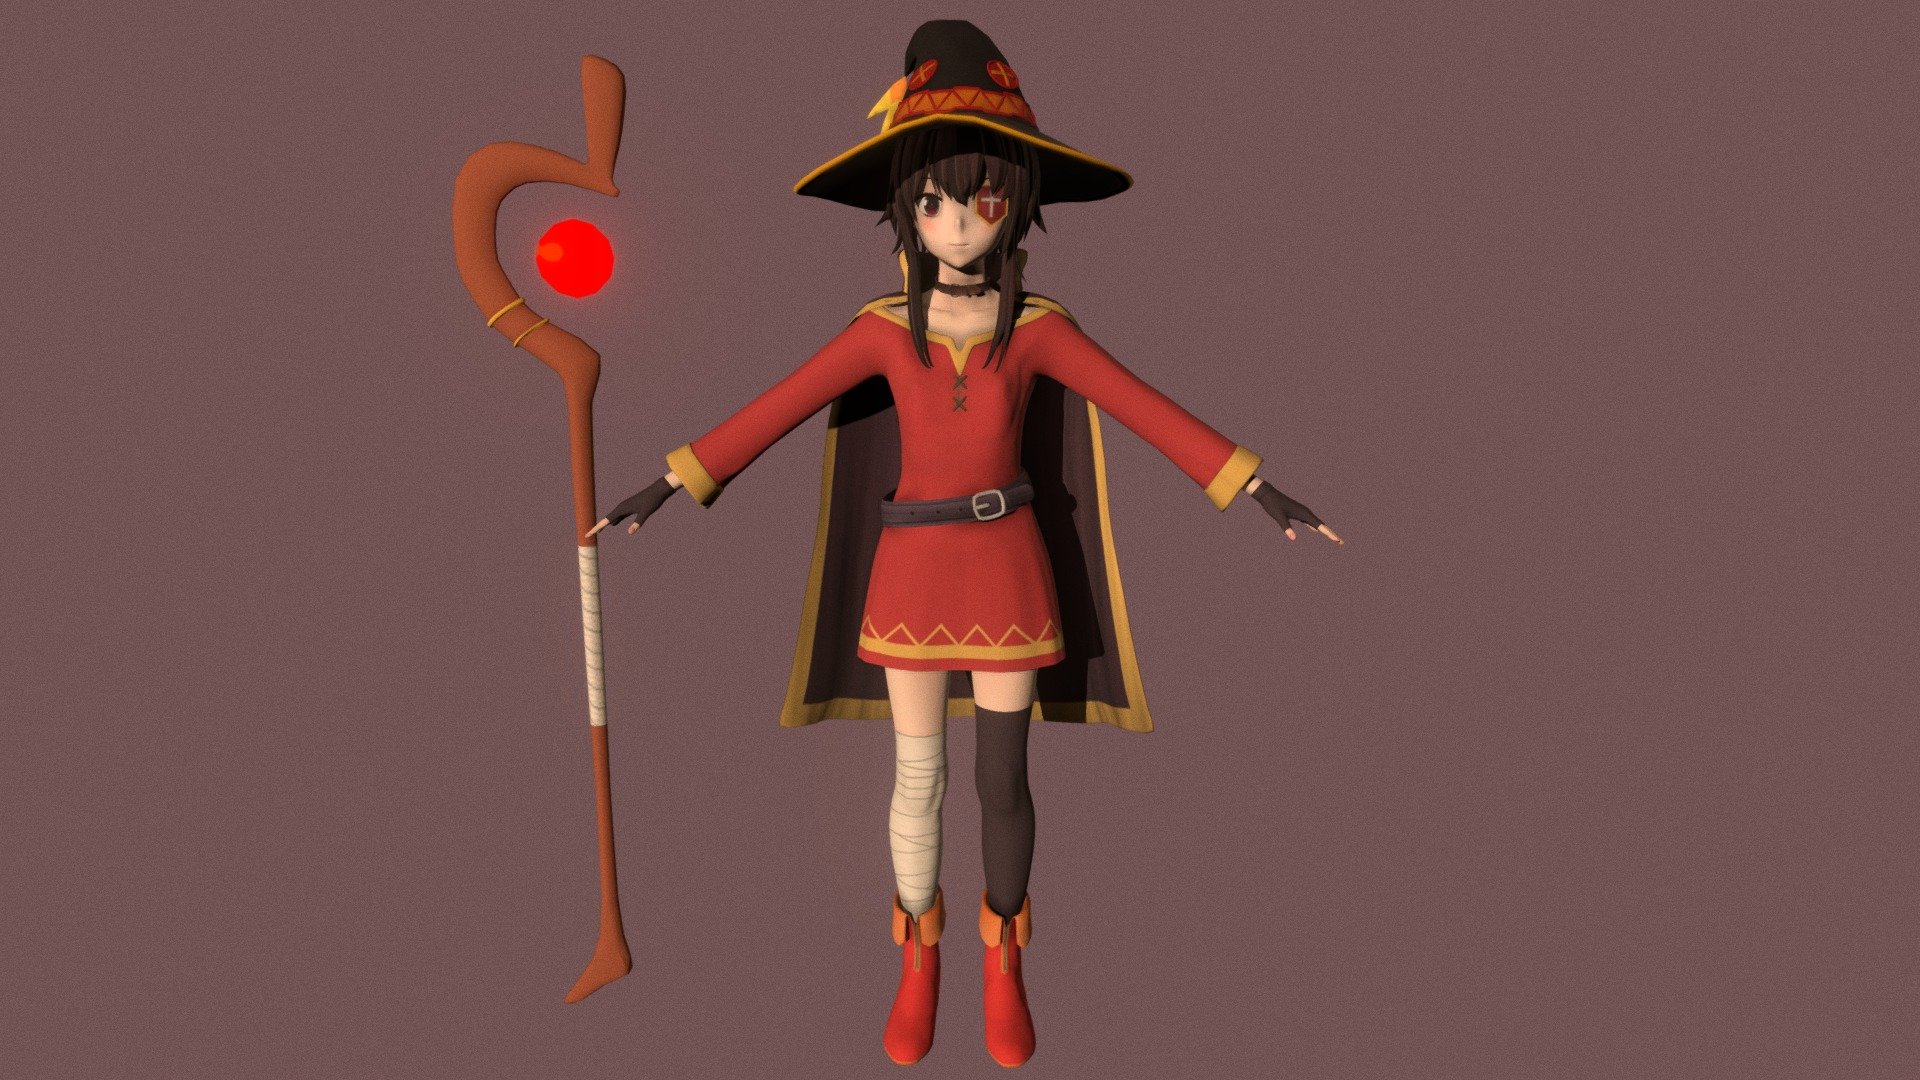 T-pose rigged model of anime girl Megumin (Konosuba).

Body and clothings are rigged and skinned by 3ds Max CAT system.

Eye direction and facial animation controlled by Morpher modifier / Shape Keys / Blendshape.

This product include .FBX (ver. 7200) and .MAX (ver. 2010) files.

3ds Max version is turbosmoothed to give a high quality render (as you can see here).

Original main body mesh have ~7.000 polys.

This 3D model may need some tweaking to adapt the rig system to games engine and other platforms.

I support convert model to various file formats (the rig data will be lost in this process): 3DS; AI; ASE; DAE; DWF; DWG; DXF; FLT; HTR; IGS; M3G; MQO; OBJ; SAT; STL; W3D; WRL; X.

You can buy all of my models in one pack to save cost: https://sketchfab.com/3d-models/all-of-my-anime-girls-c5a56156994e4193b9e8fa21a3b8360b

And I can make commission models.

If you have any questions, please leave a comment or contact me via my email 3d.eden.project@gmail.com 3d model